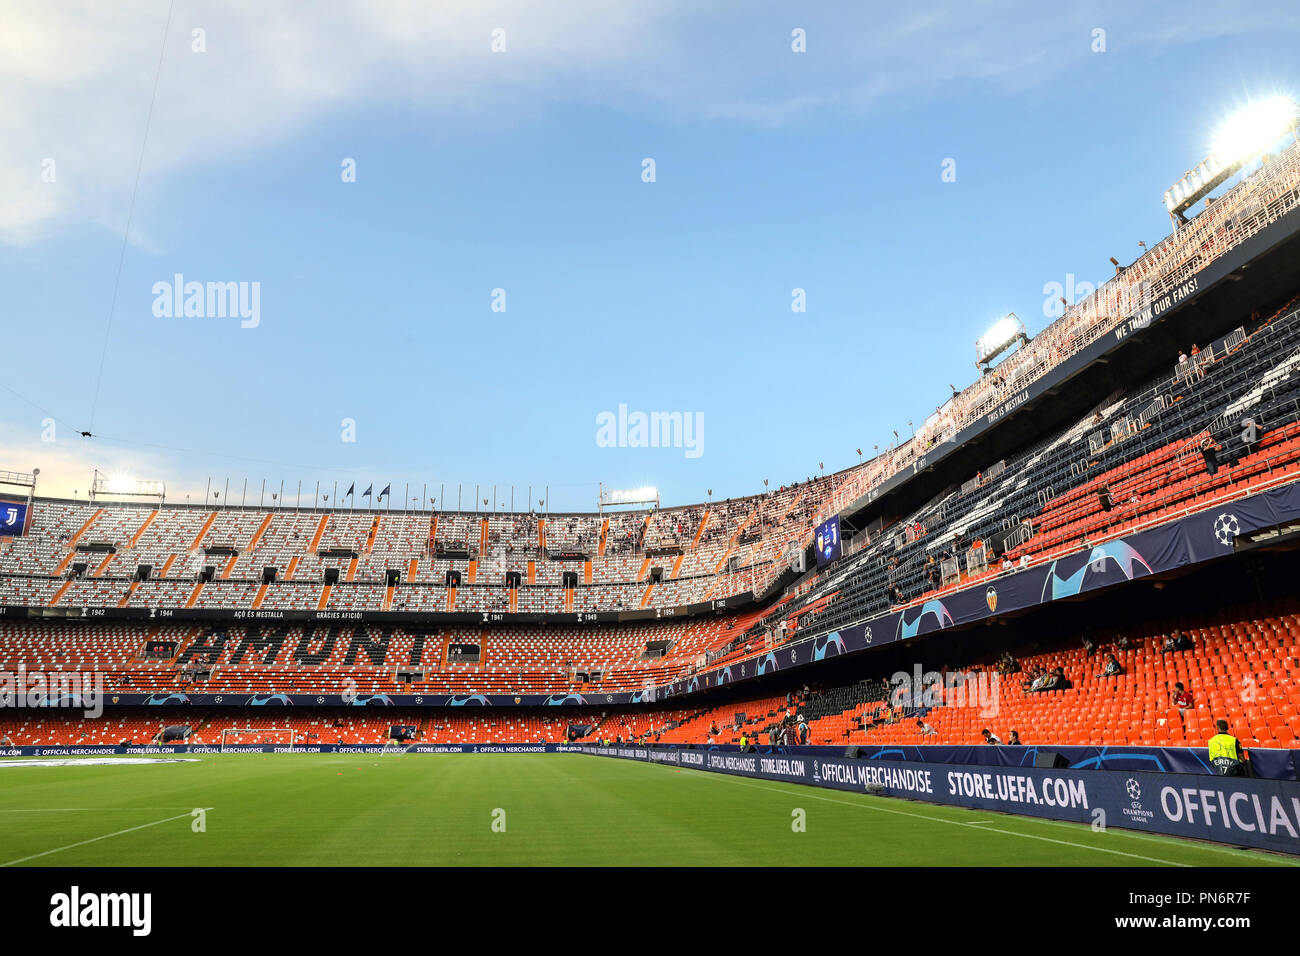 September 19, 2018 - Valencia, Spain - Genaral view of Mestalla Stadium ahead of the UEFA Champions League, Group H football match between Valencia CF and Juventus FC on September 19, 2018 at Mestalla stadium in Valencia, Spain (Credit Image: © Manuel Blondeau via ZUMA Wire) Stock Photo